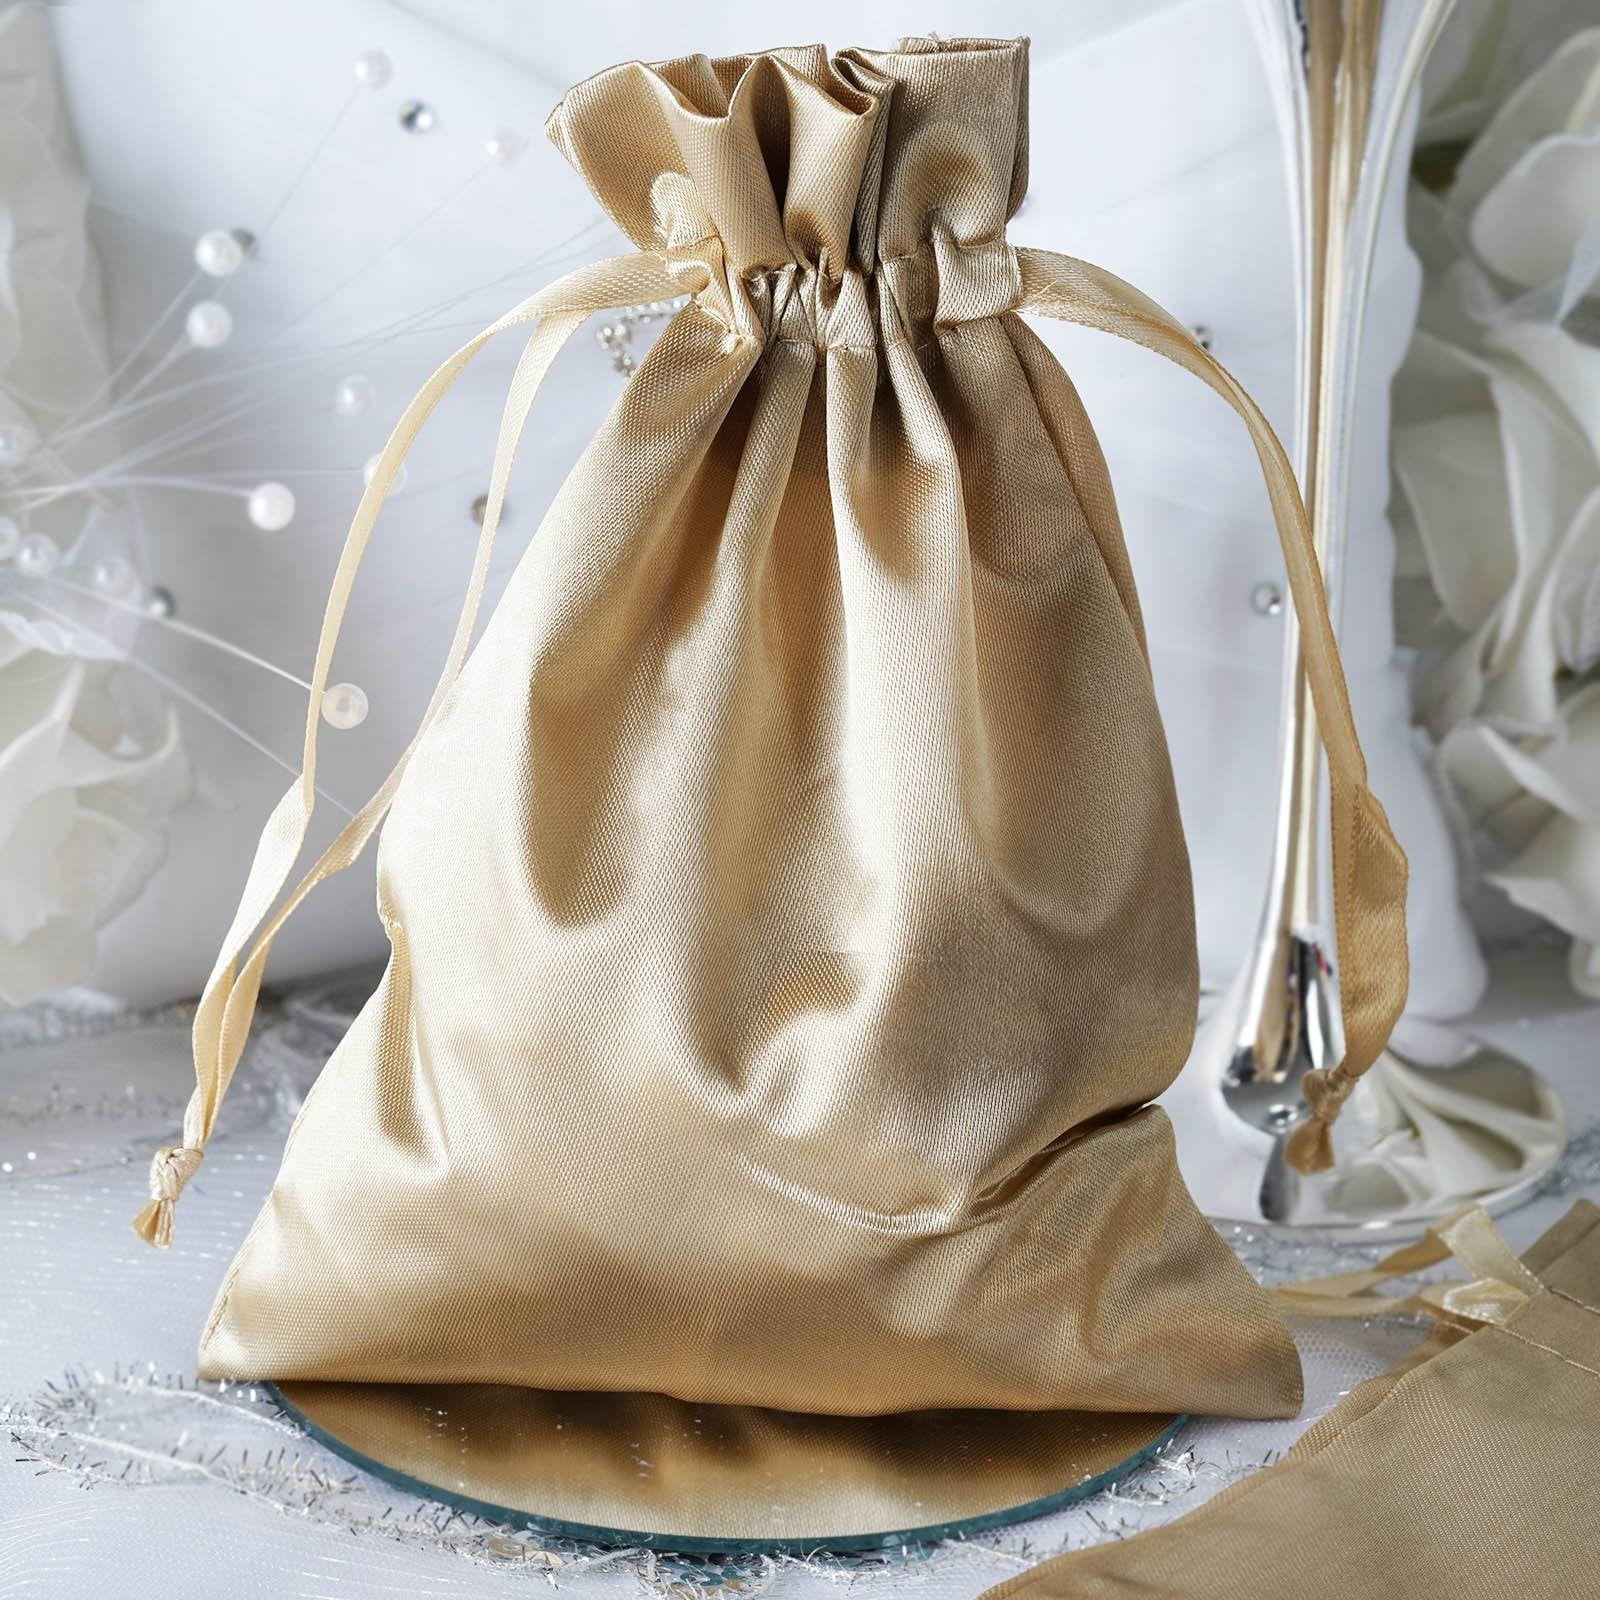 bag 4x6 inch Ivory or White 5 Satin Lace & Pearl WEDDING RING or FAVOUR pouch 